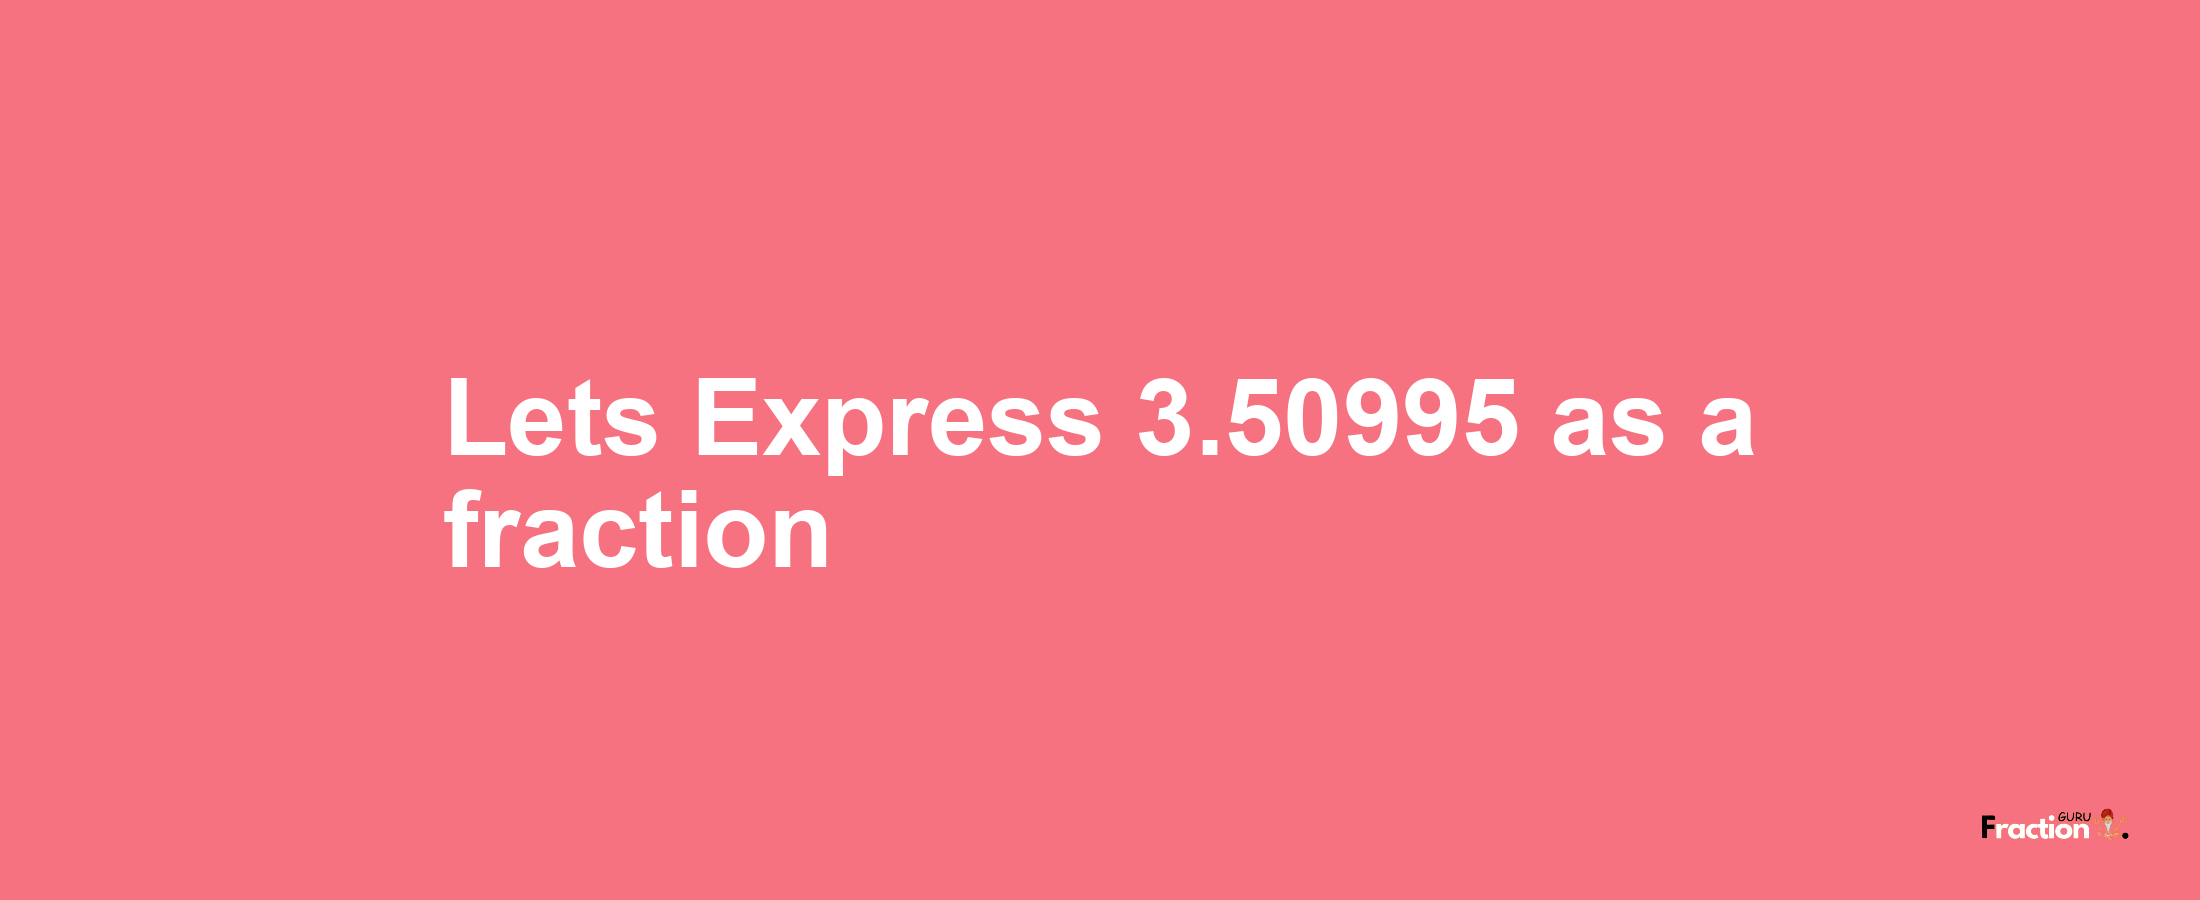 Lets Express 3.50995 as afraction